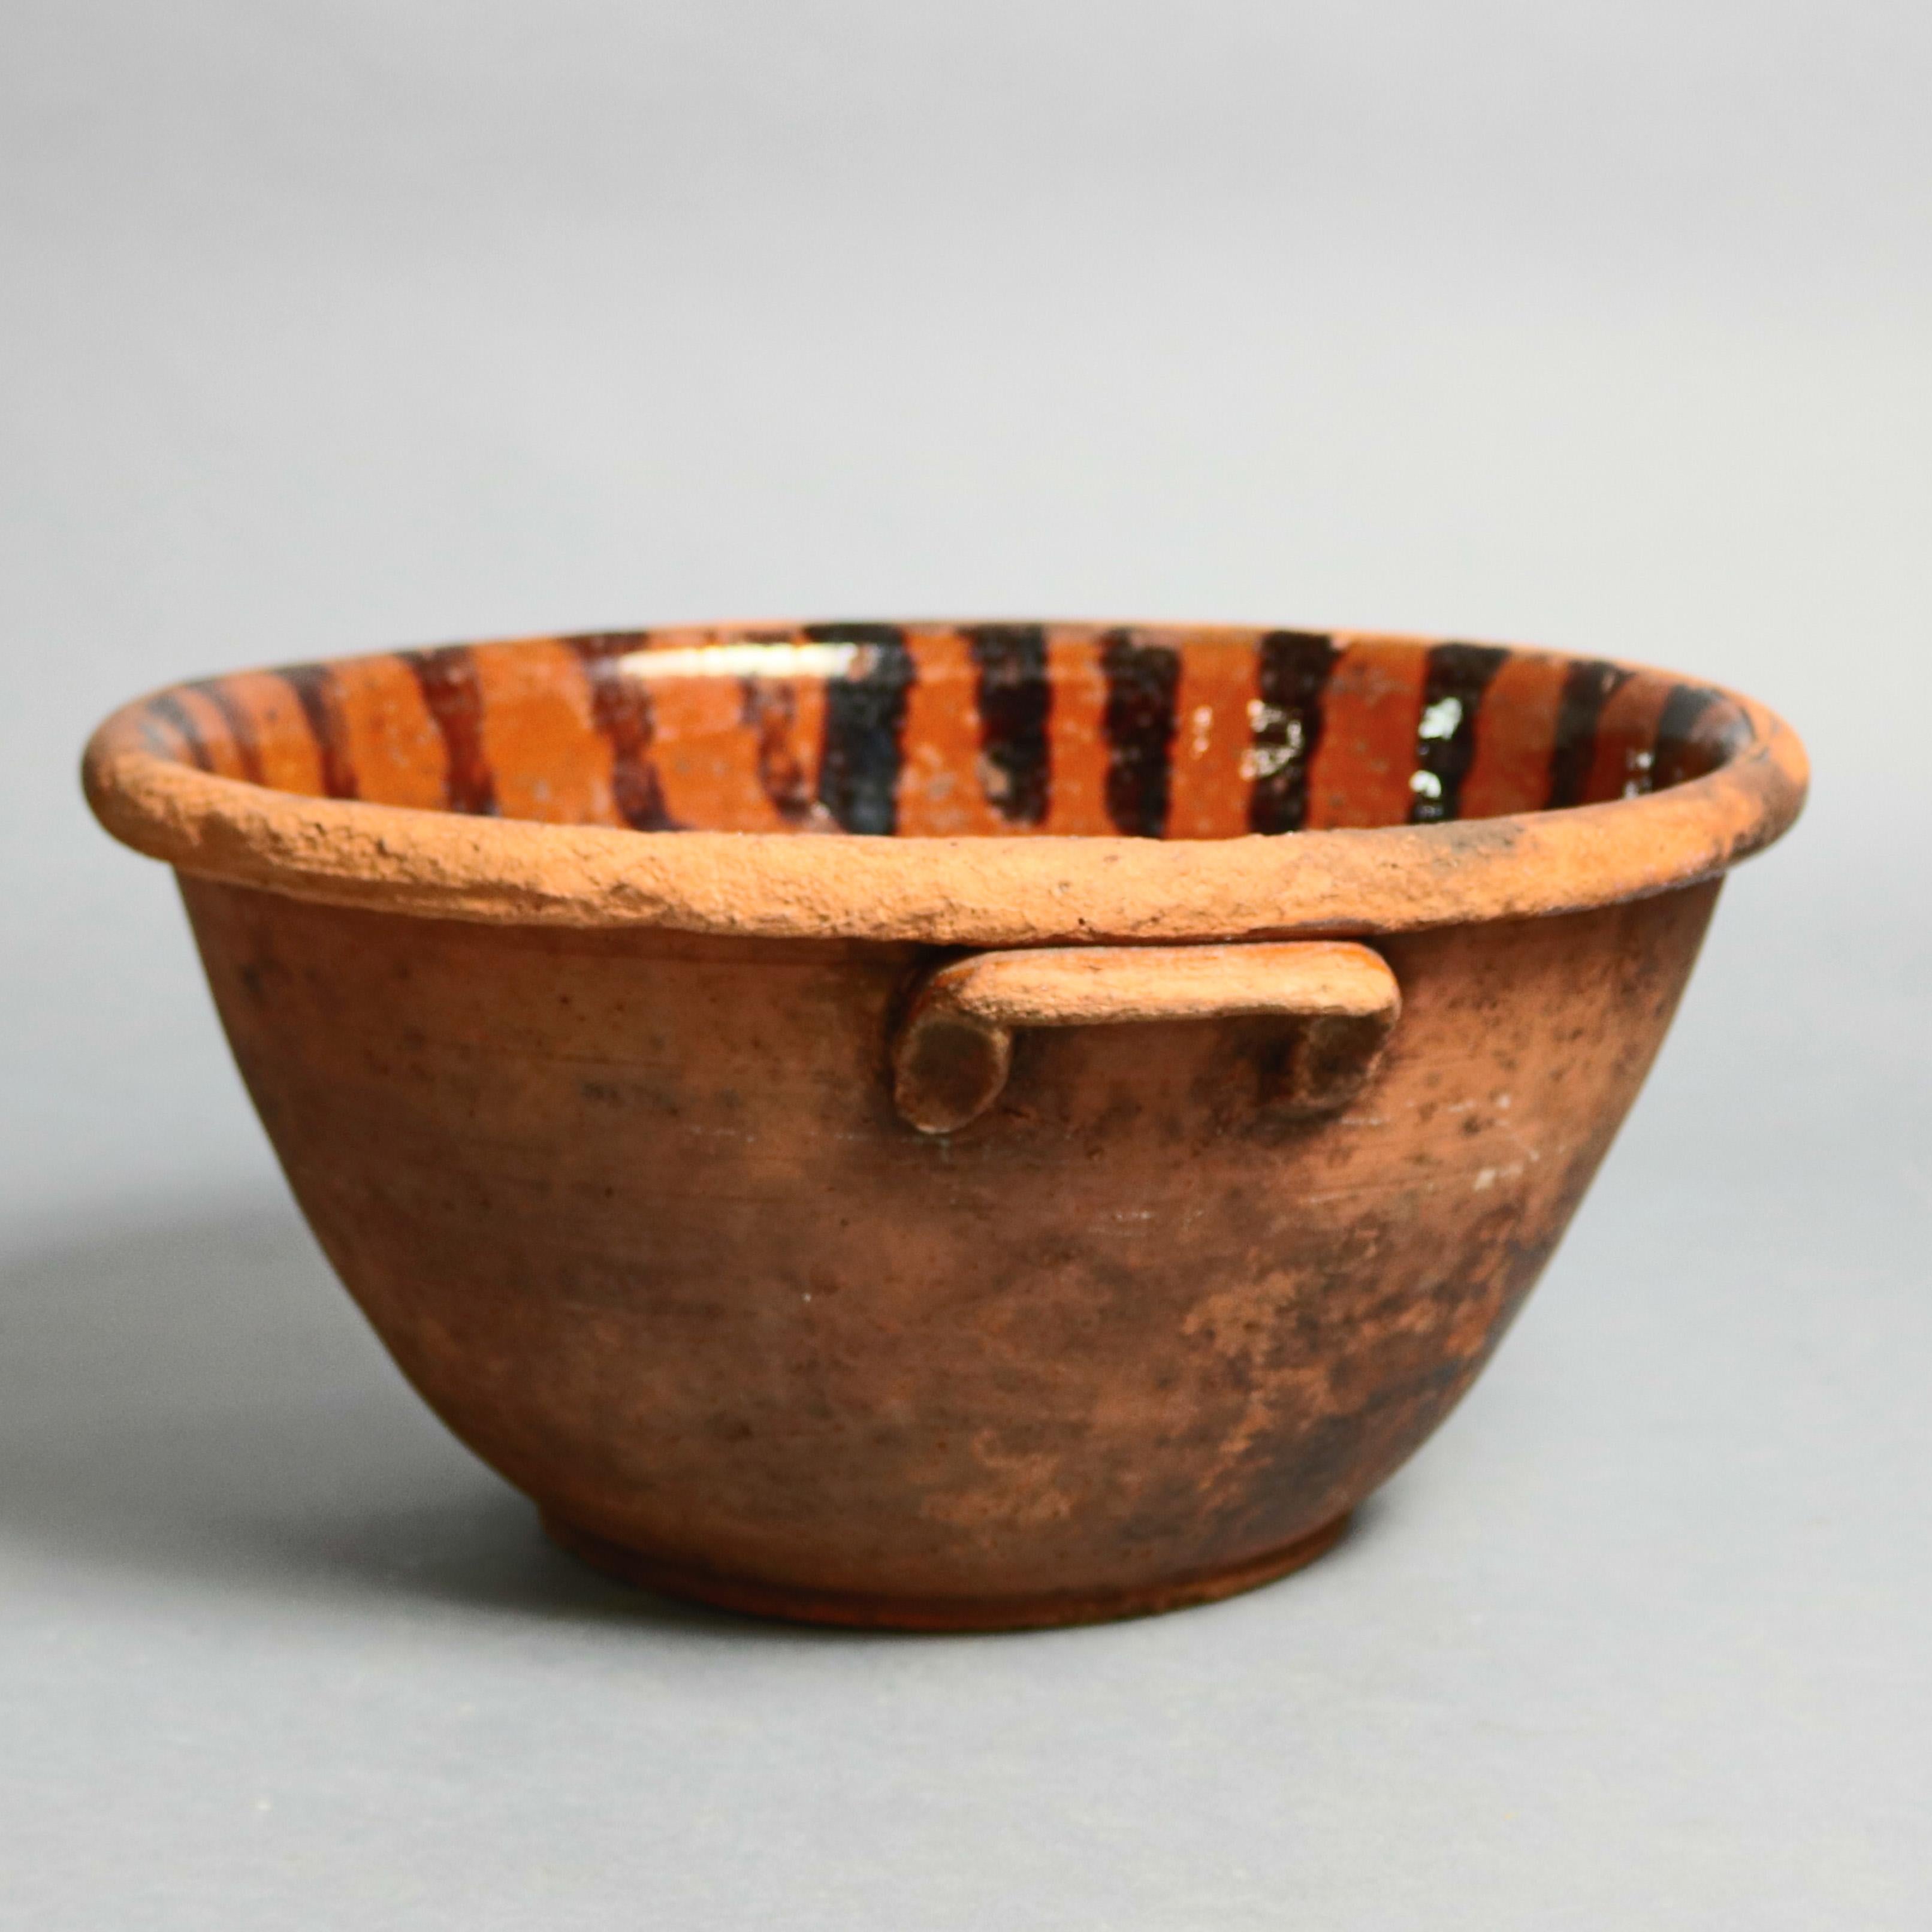 An early mixing bowl features redware construction in flared form with handles, interior hand decorated, circa 1840

Measures: 7.25